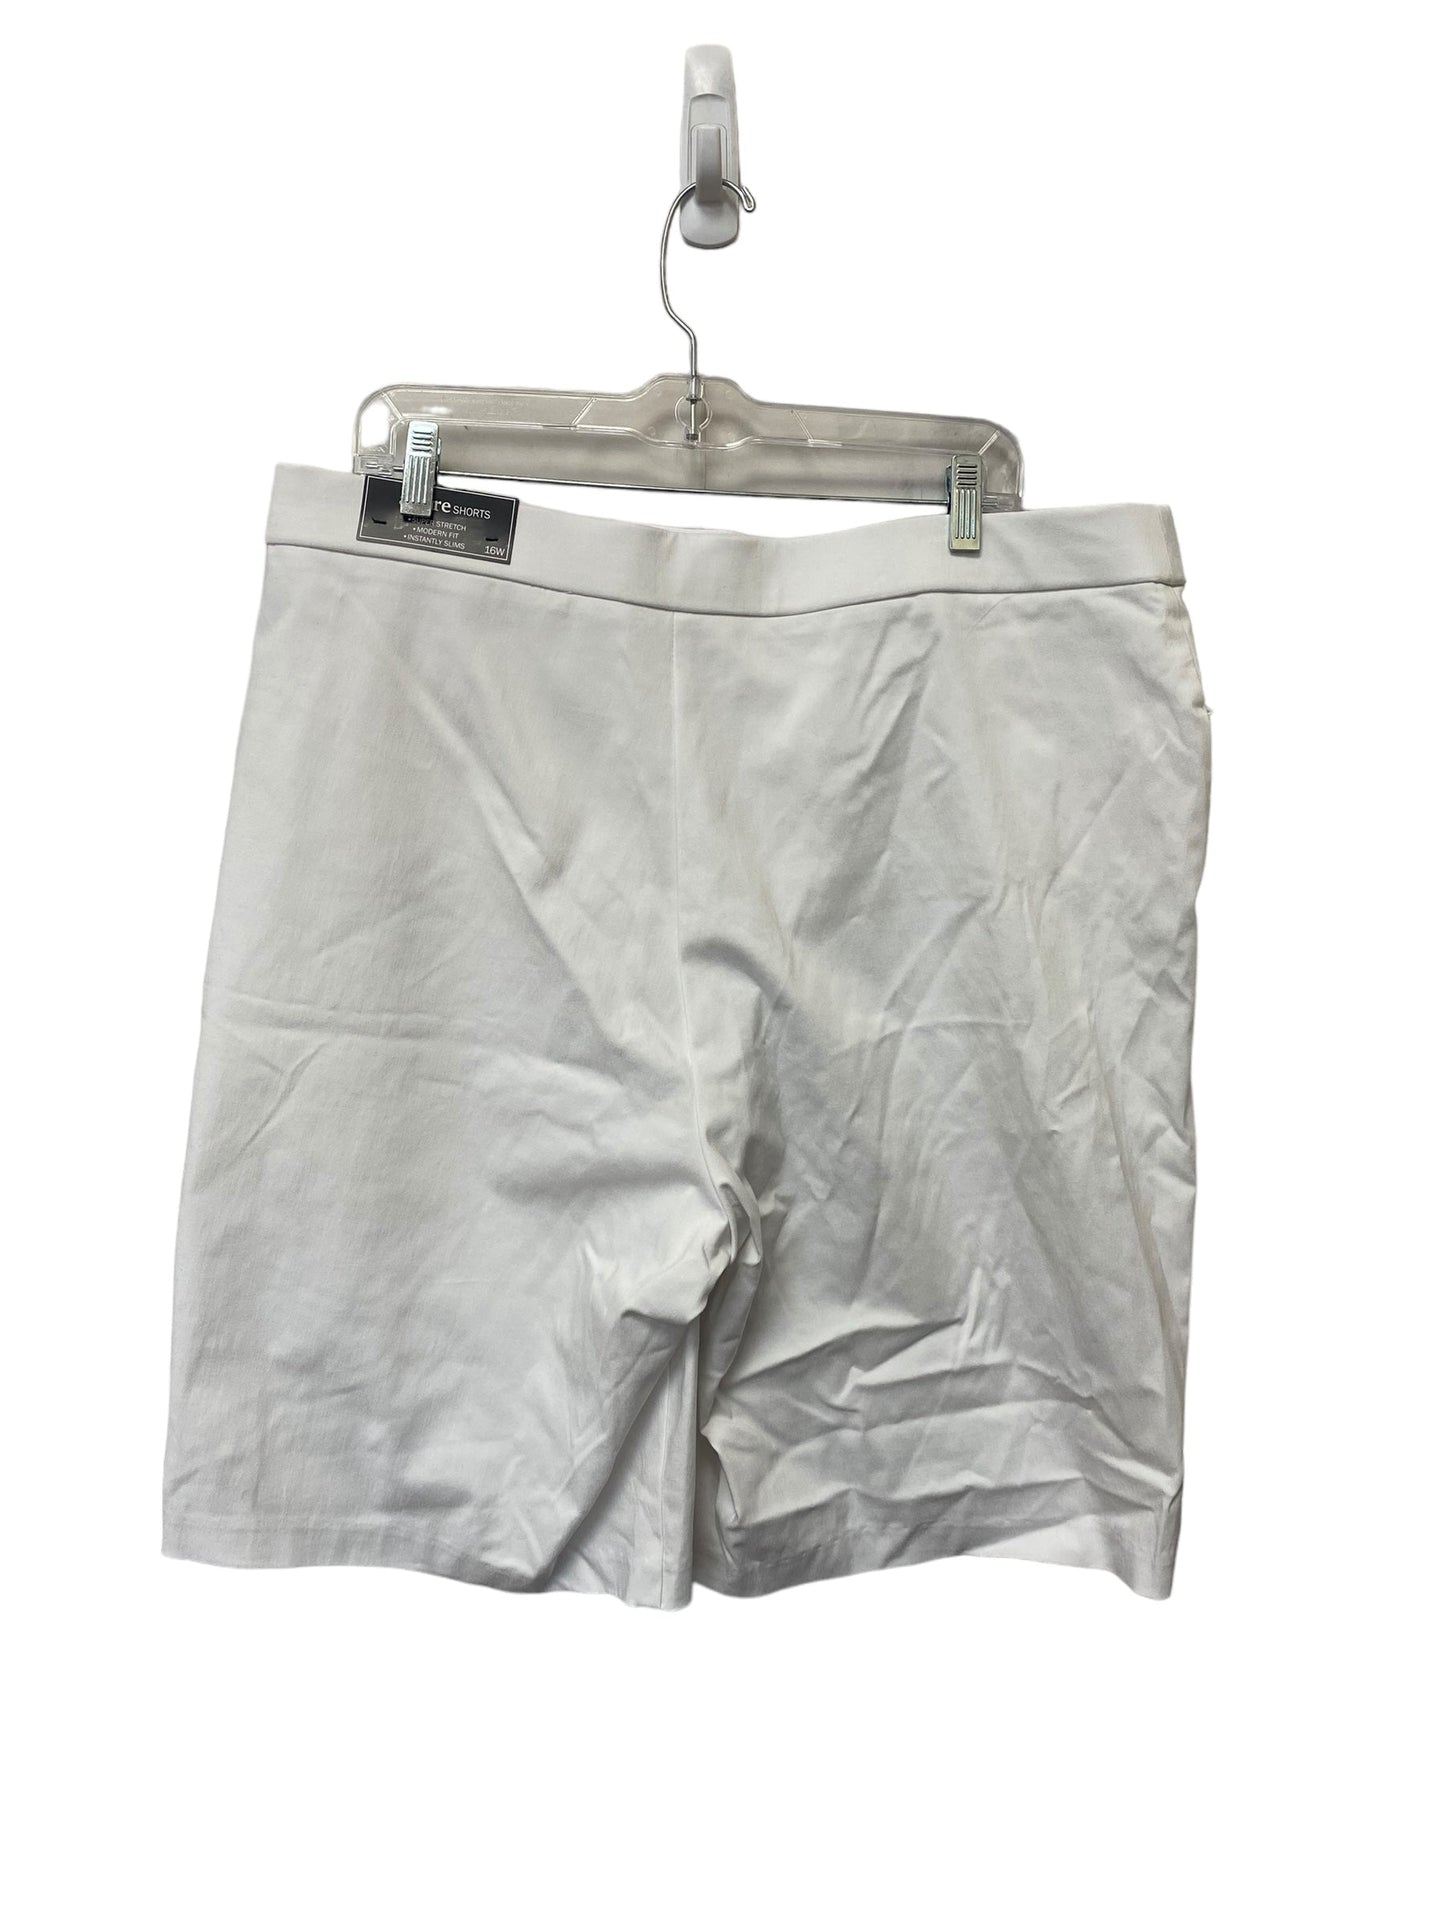 White Shorts Alfred Dunner, Size 16